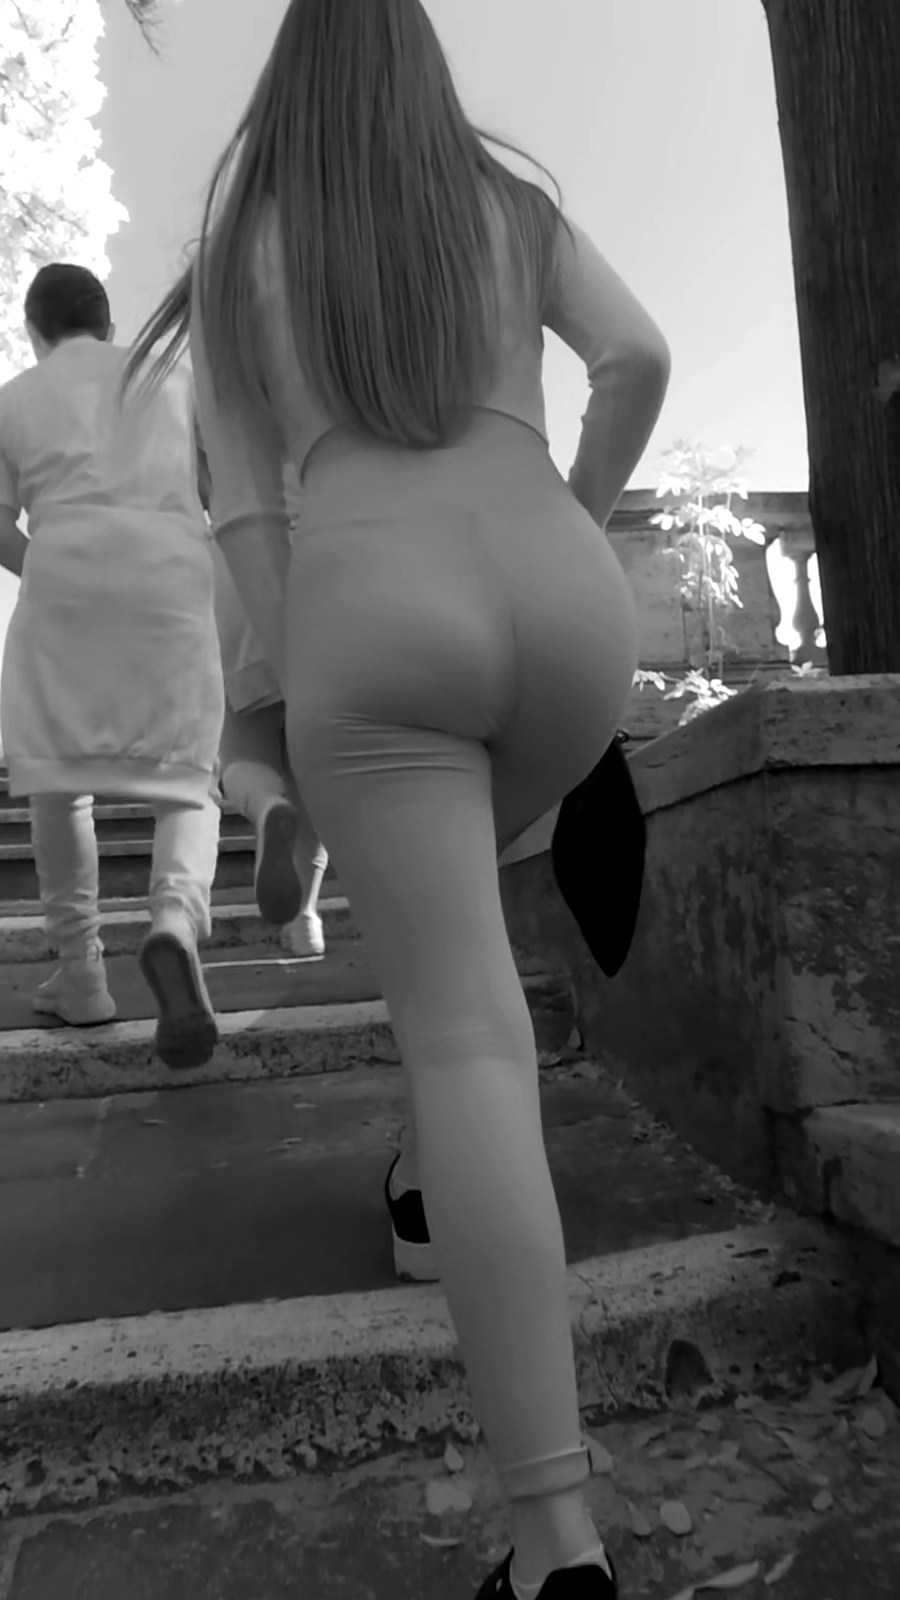 Cute Slim TEEN With BIG ASS In White Spandex With Visible Panty Lines - Candid Teens - Creepshots - Candid Voyeur Girls - Candid Ass Girls pic